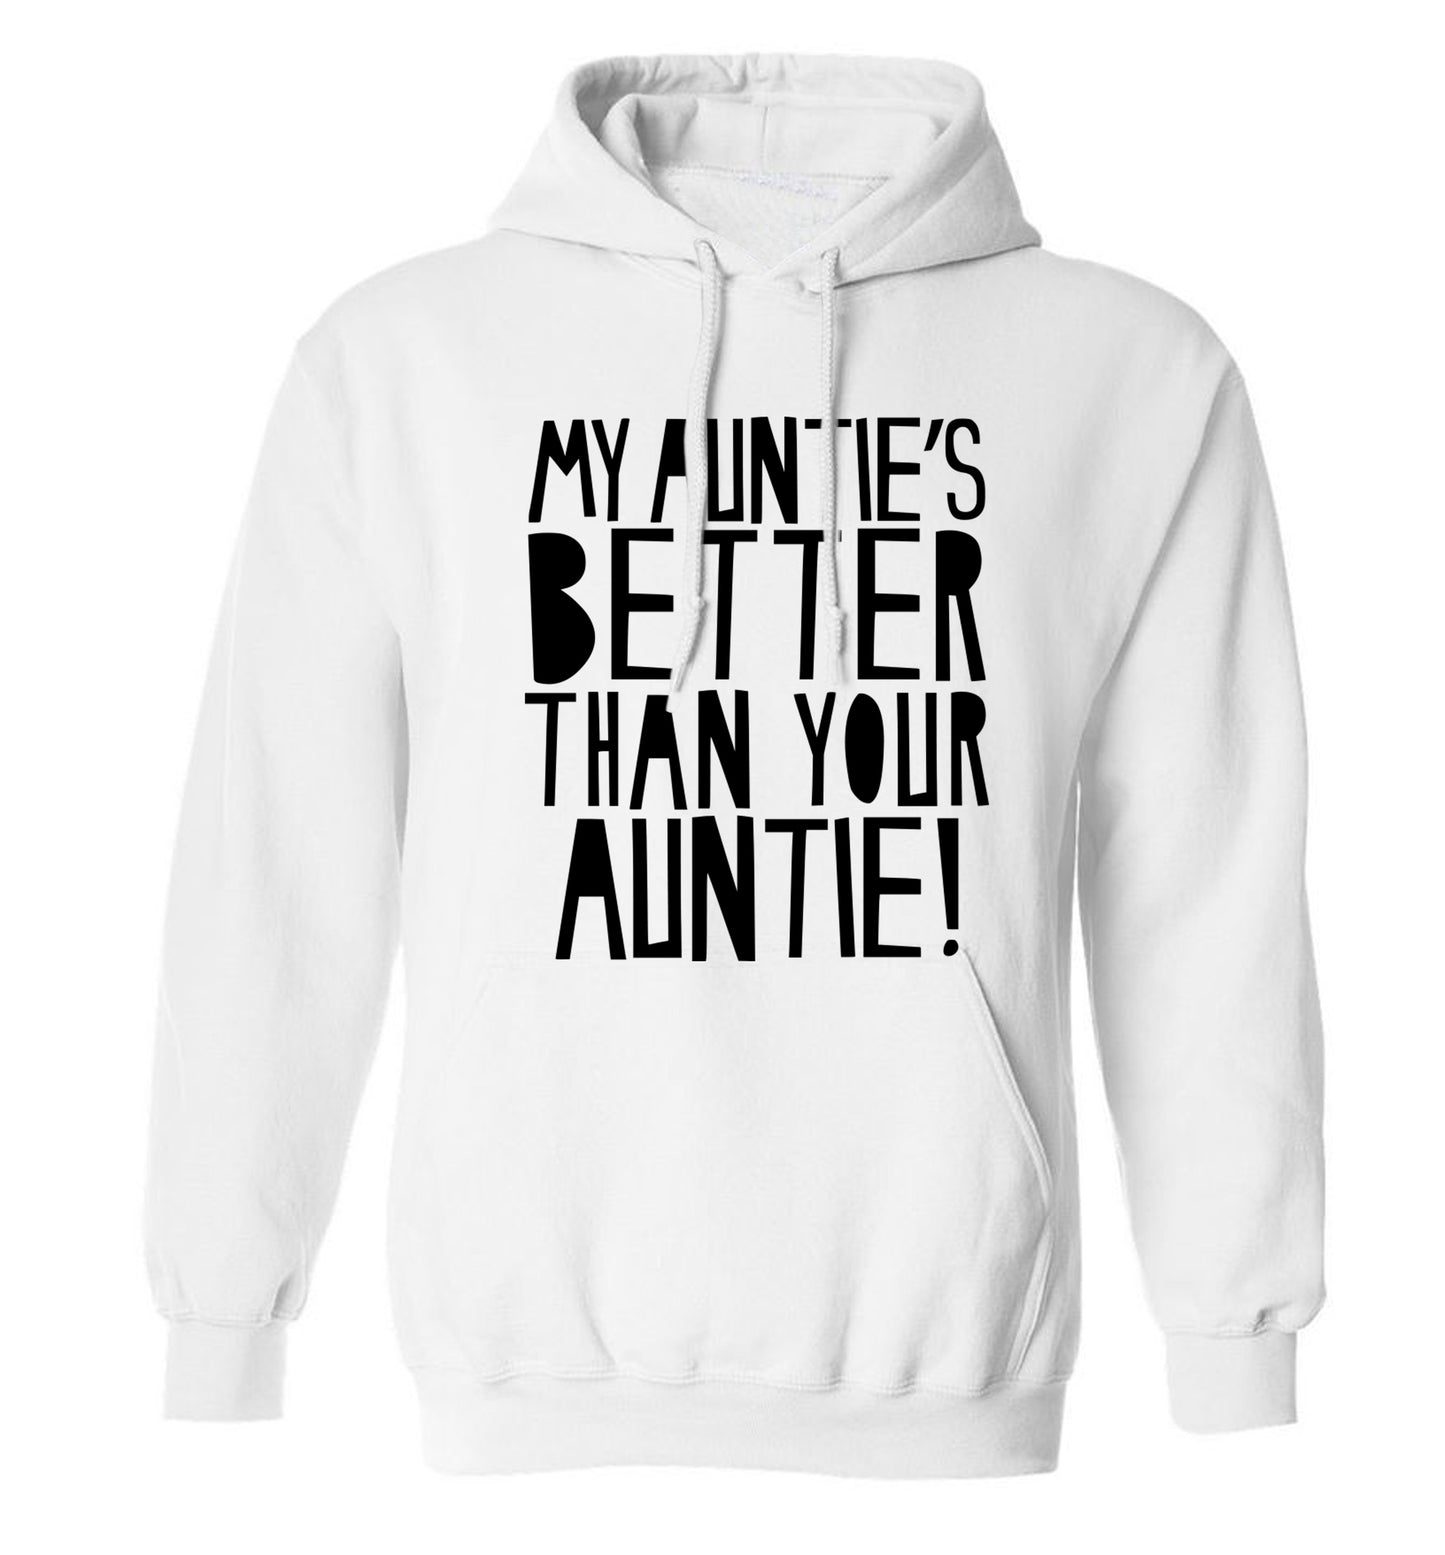 My auntie's better than your auntie adults unisex white hoodie 2XL